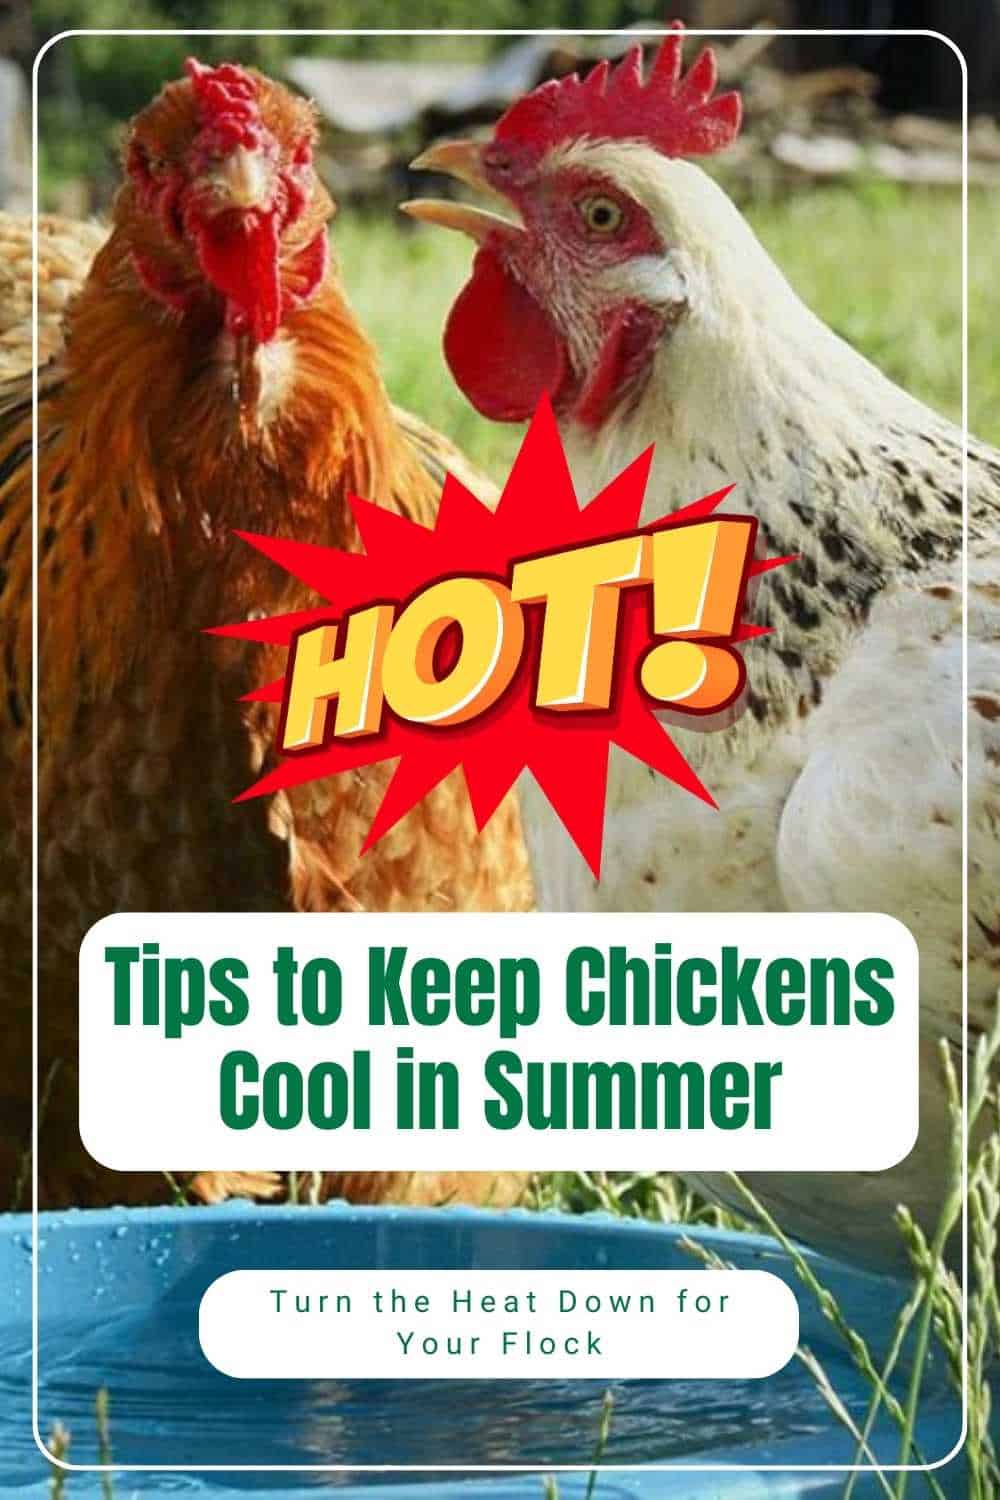 Keeping Chickens Cool in Summer